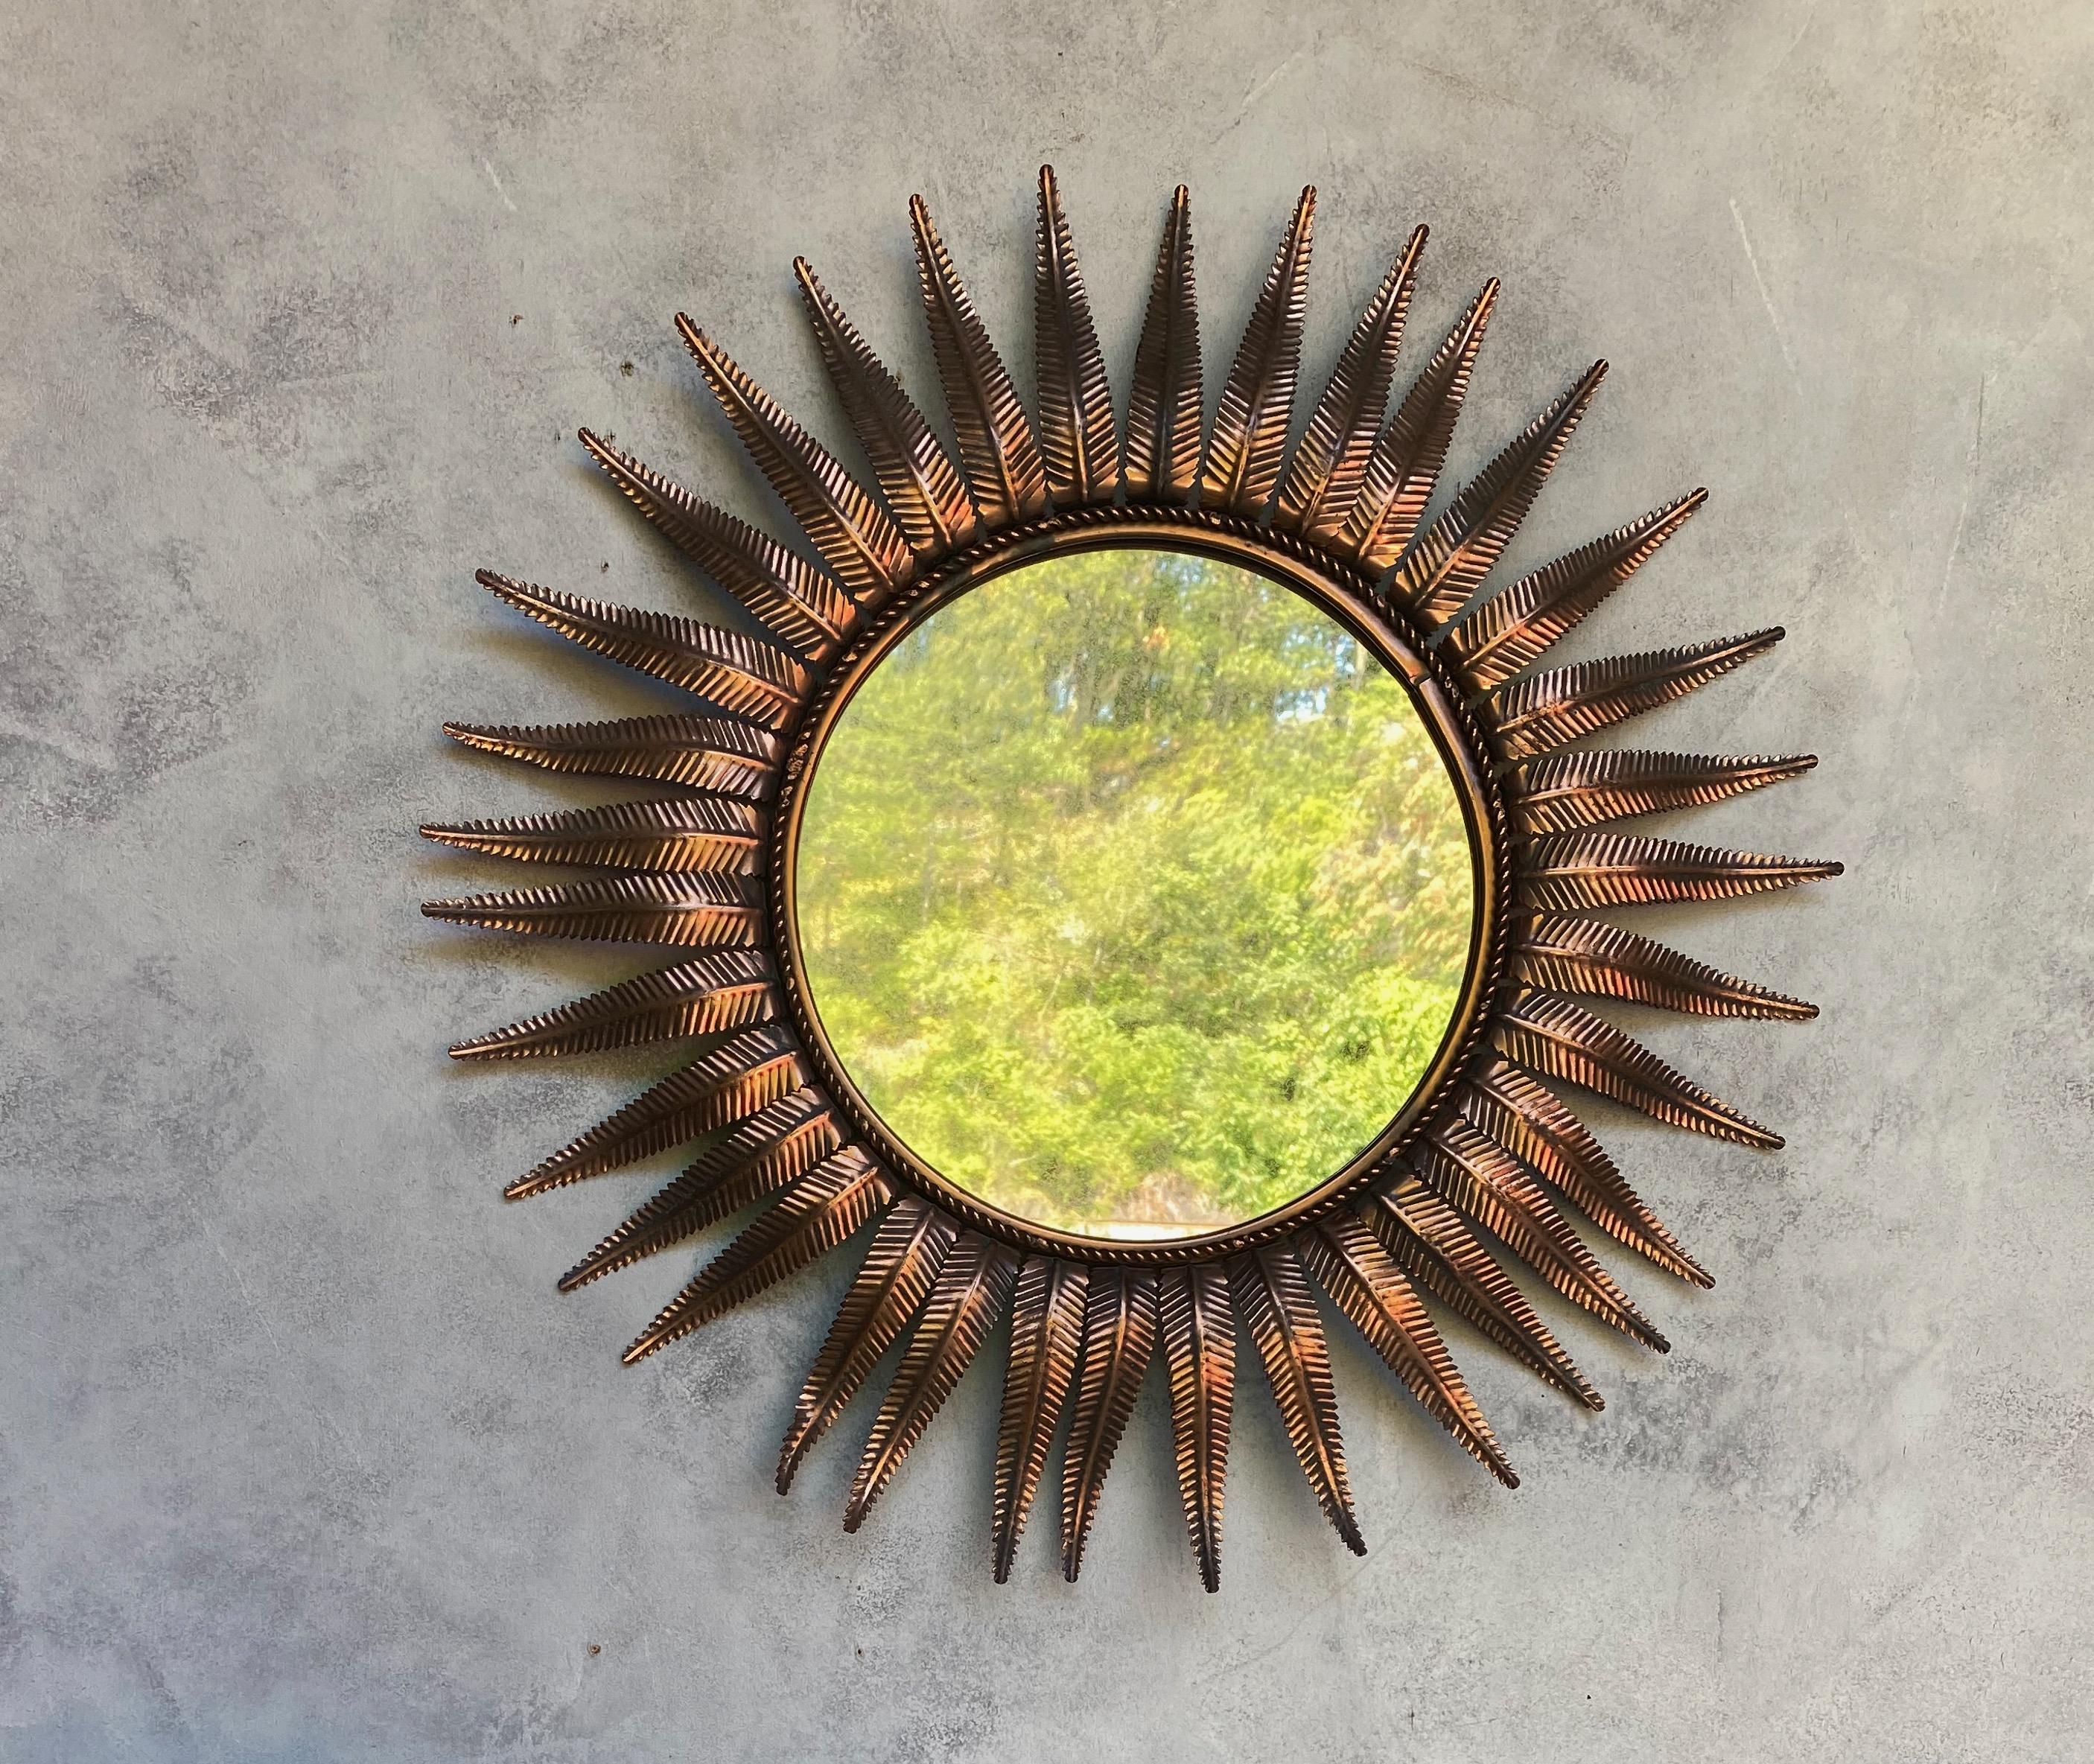 An elegant Spanish copper-plated sunburst mirror made in Spain in the 1950s. This Mid-Century Modern piece boasts a stunning copper-plated metal frame of stylized fern leaves in a sunburst pattern. The mirror's original richly patinated copper